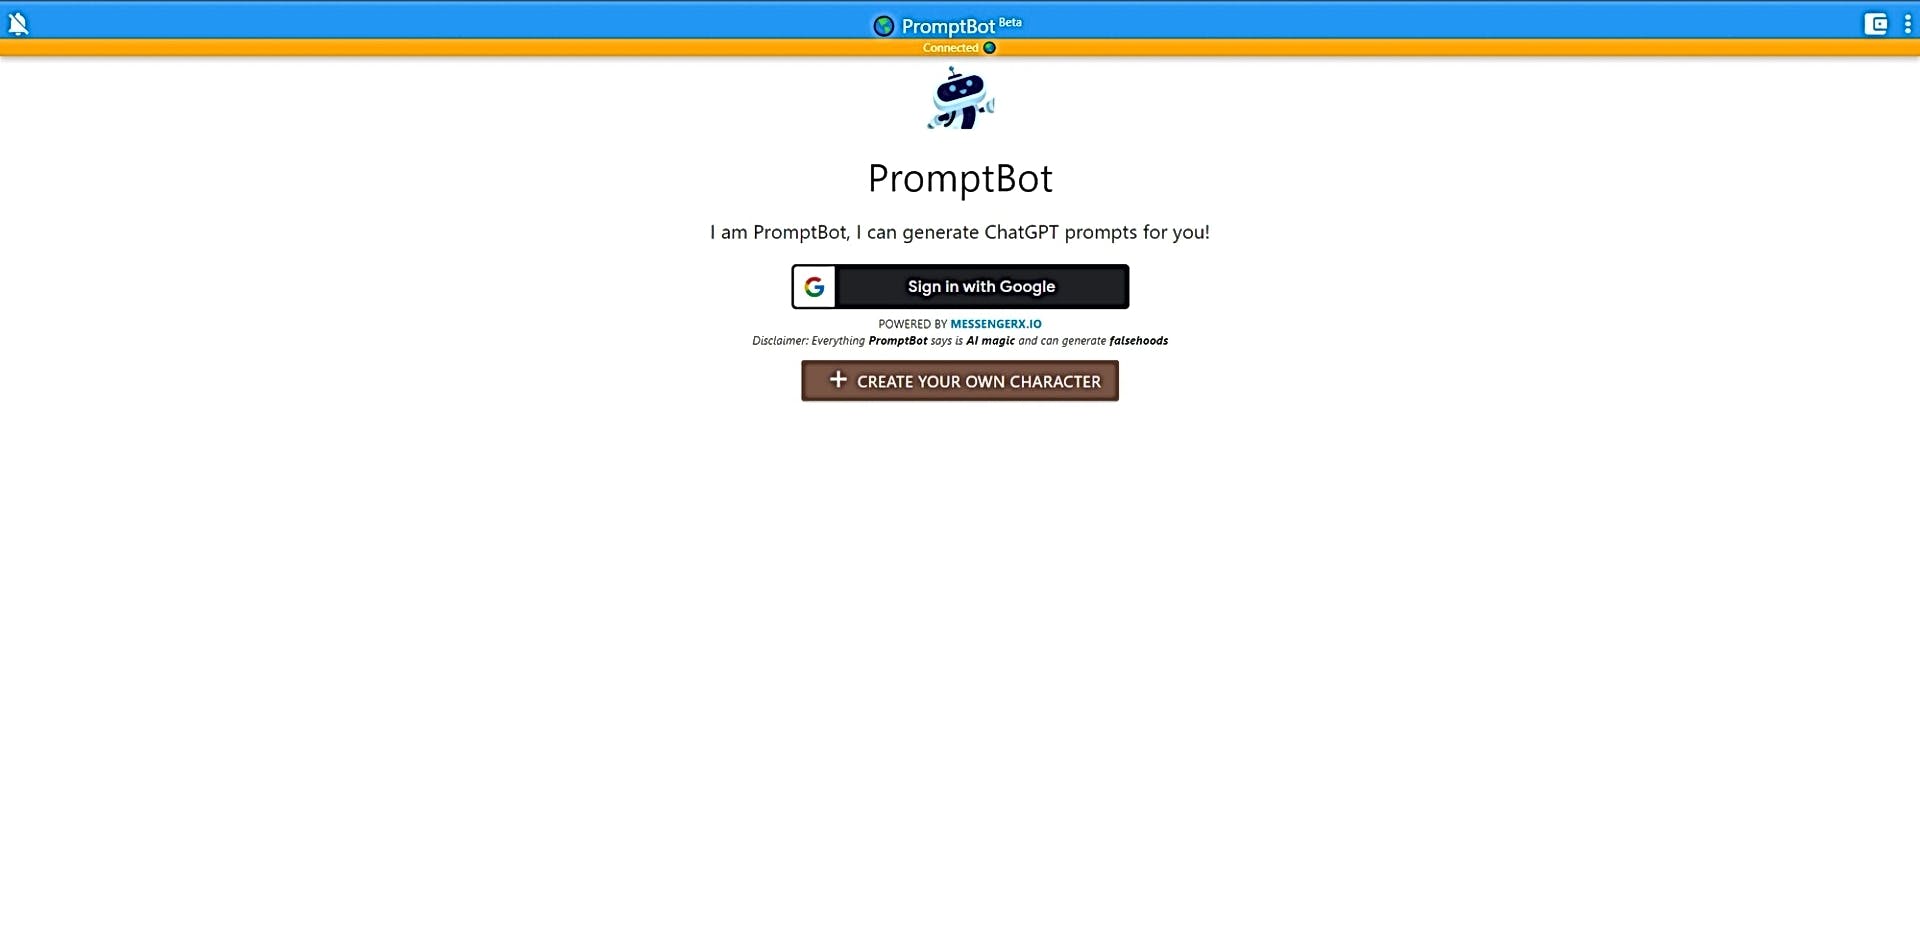 PromptBot featured